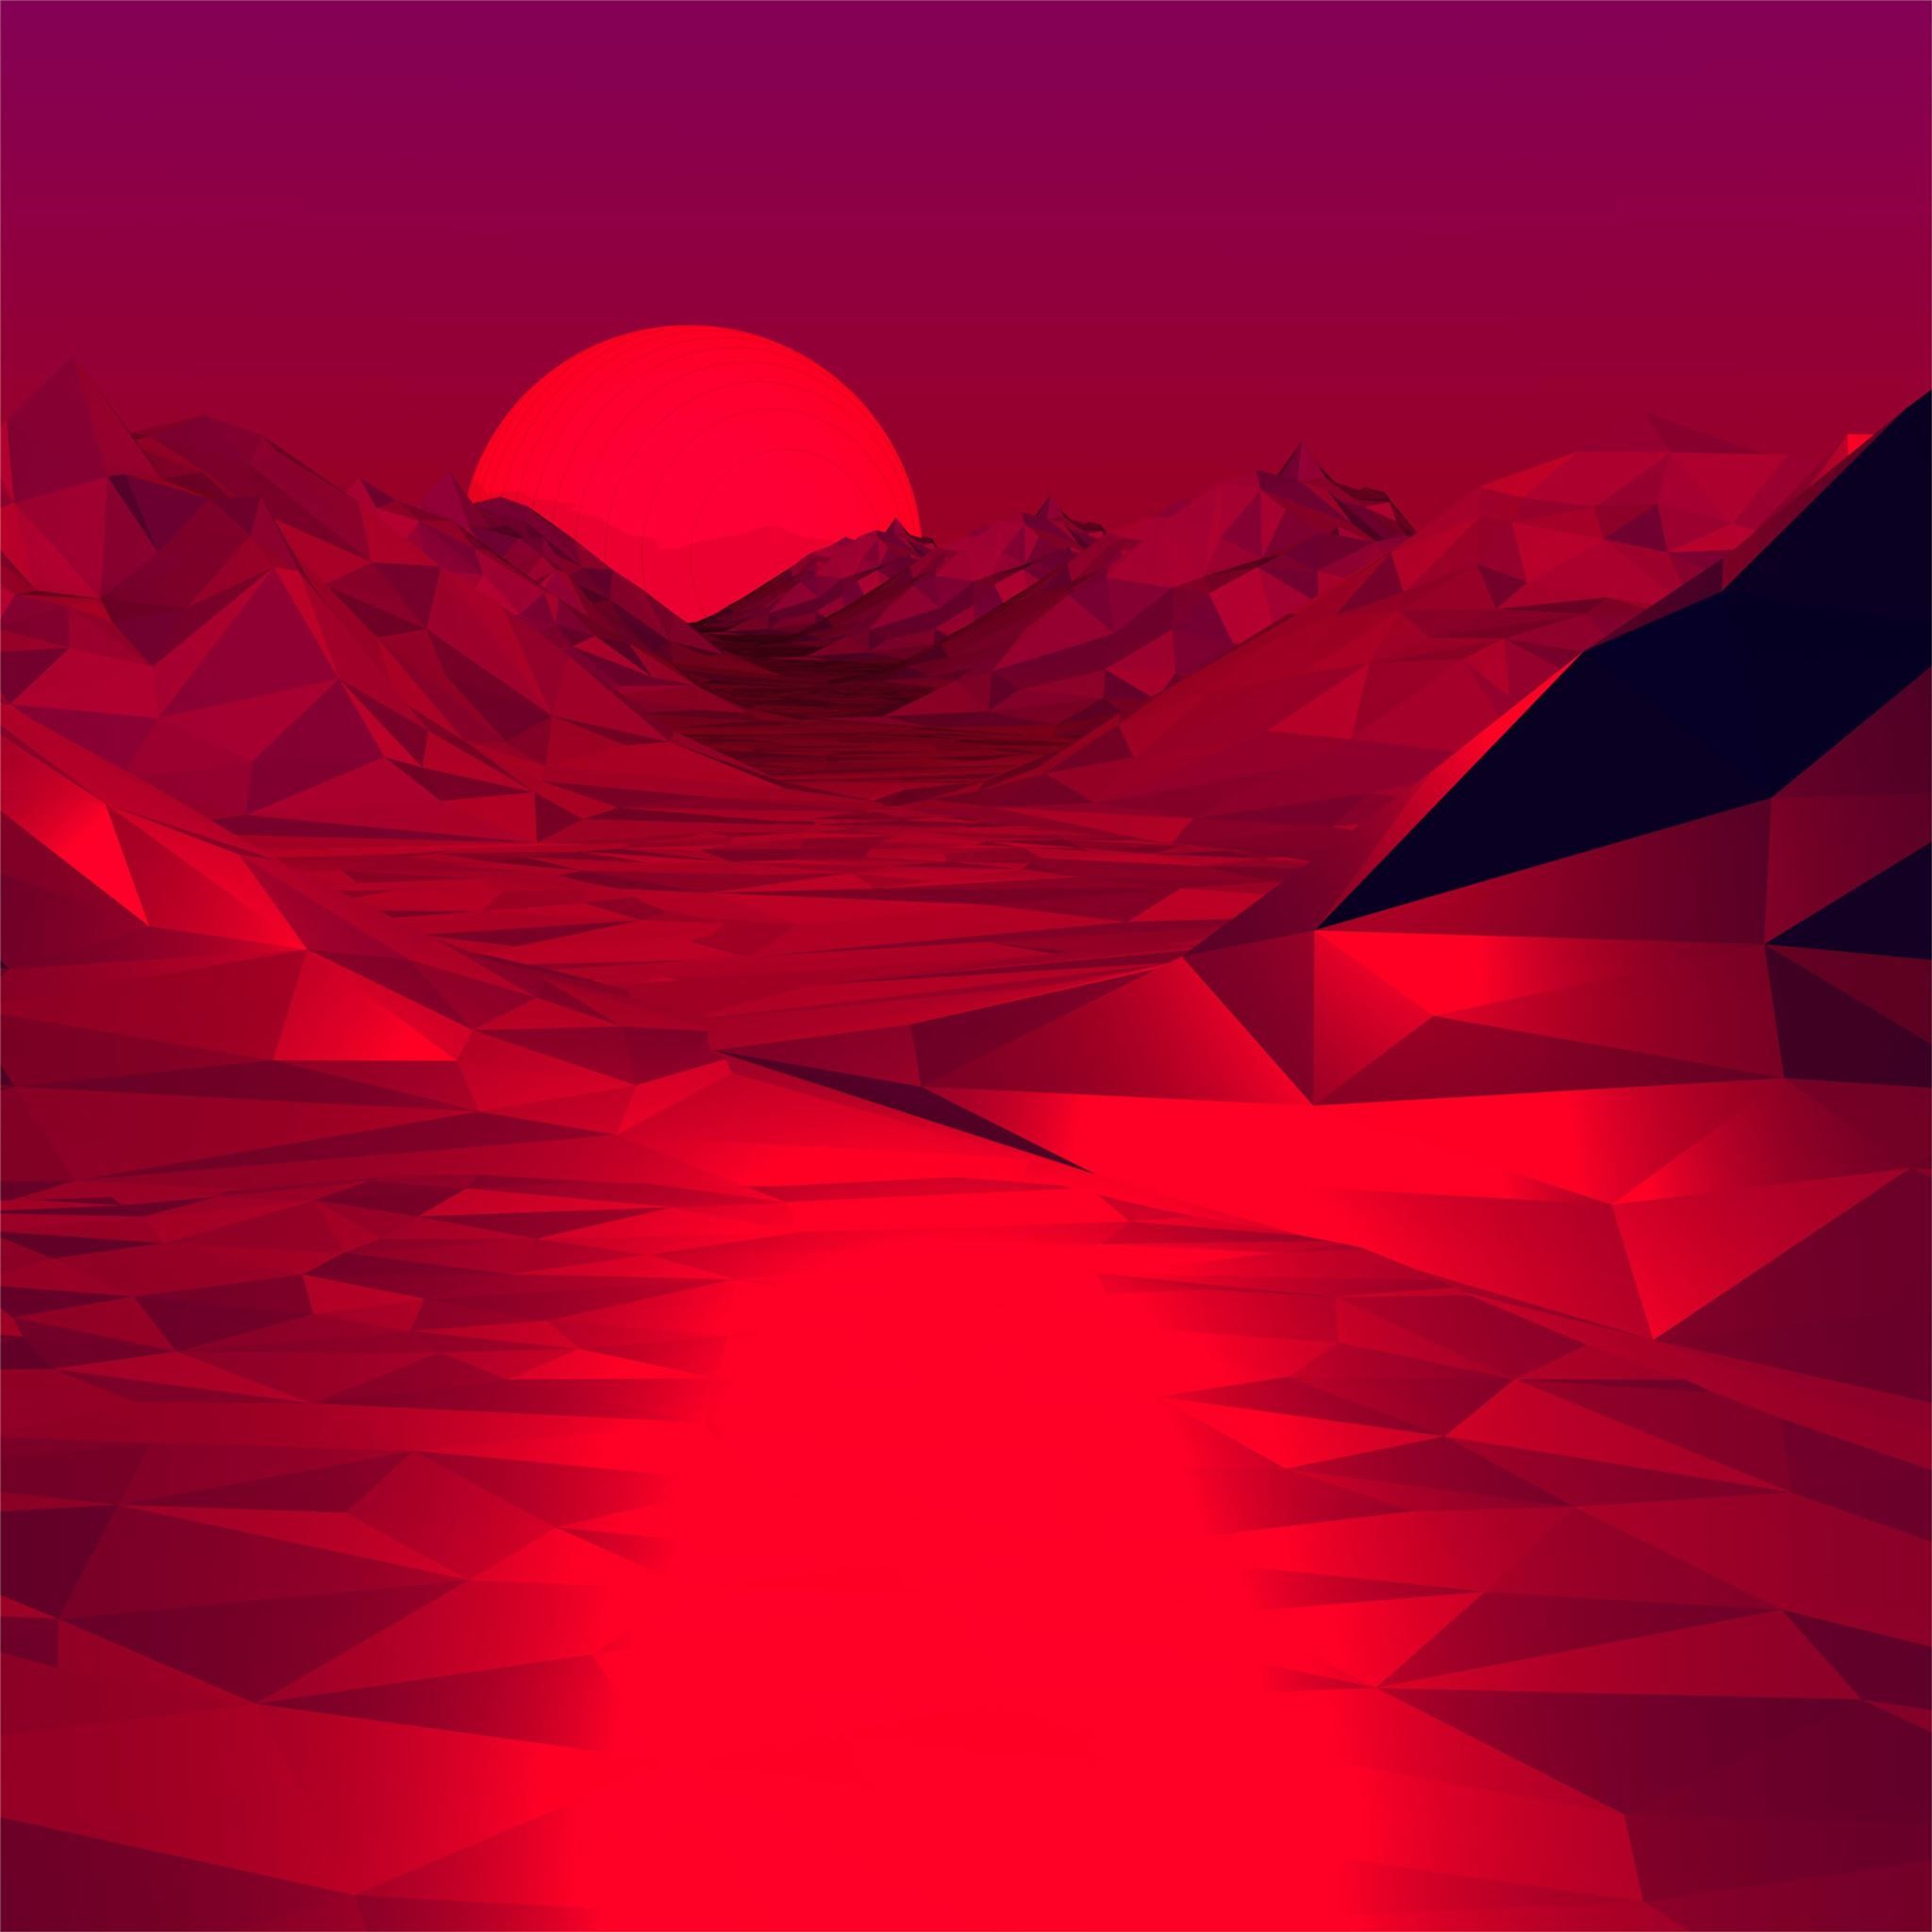 low poly red 3D abstract 4k iPad Pro Wallpaper Free Download